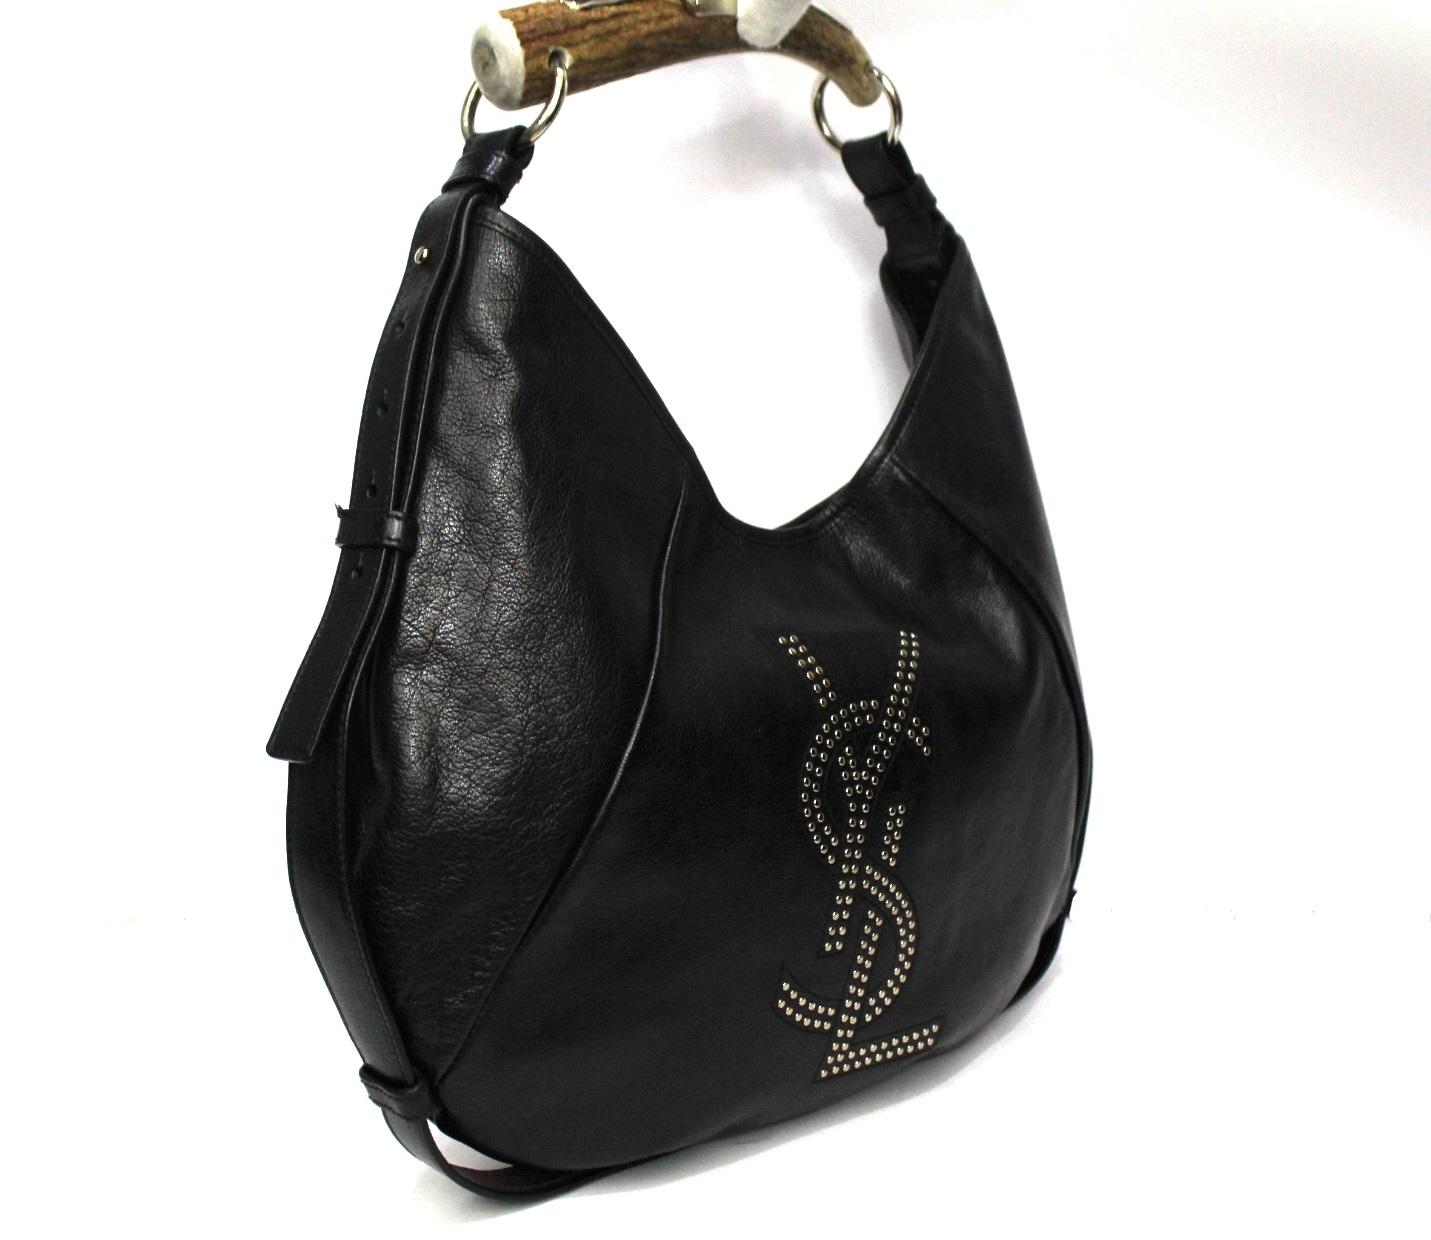 YSL bag Mombasa model in its large size, made of black leather. Golden hardware and bone handle. Magnetic button closure, internally large. VERY GOOD CONDITION